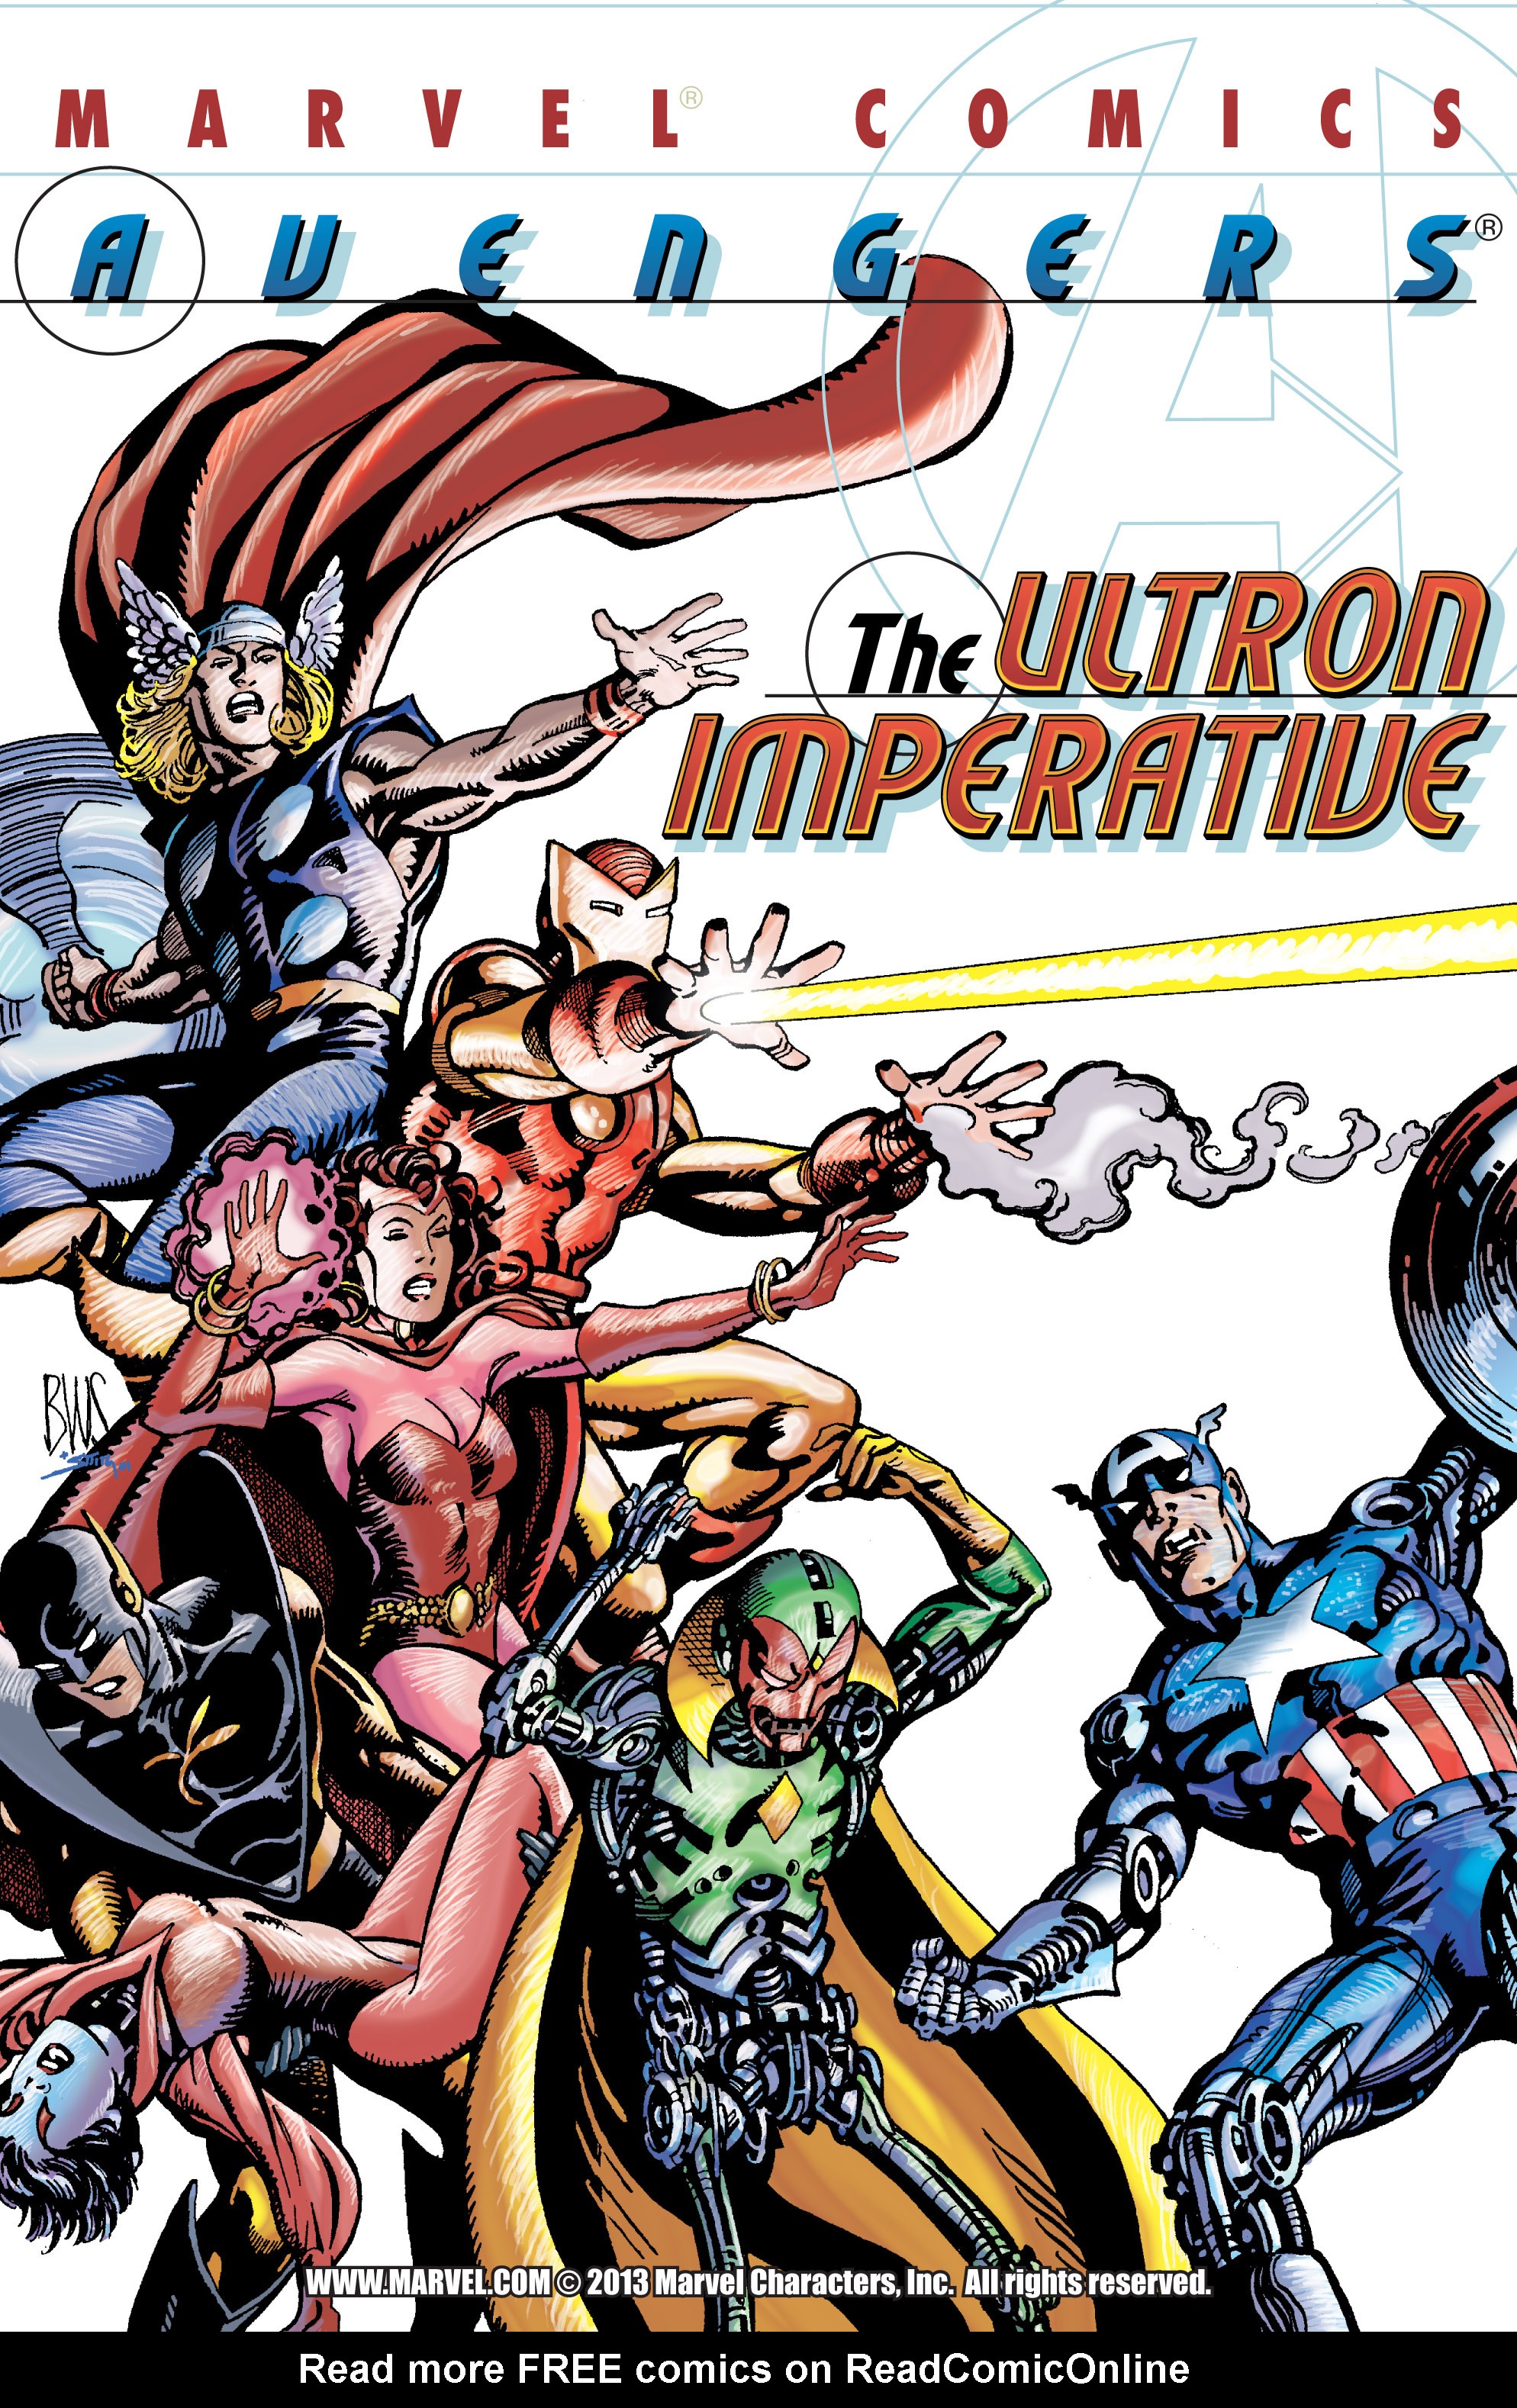 Read online Avengers: The Ultron Imperativea comic -  Issue # Full - 1